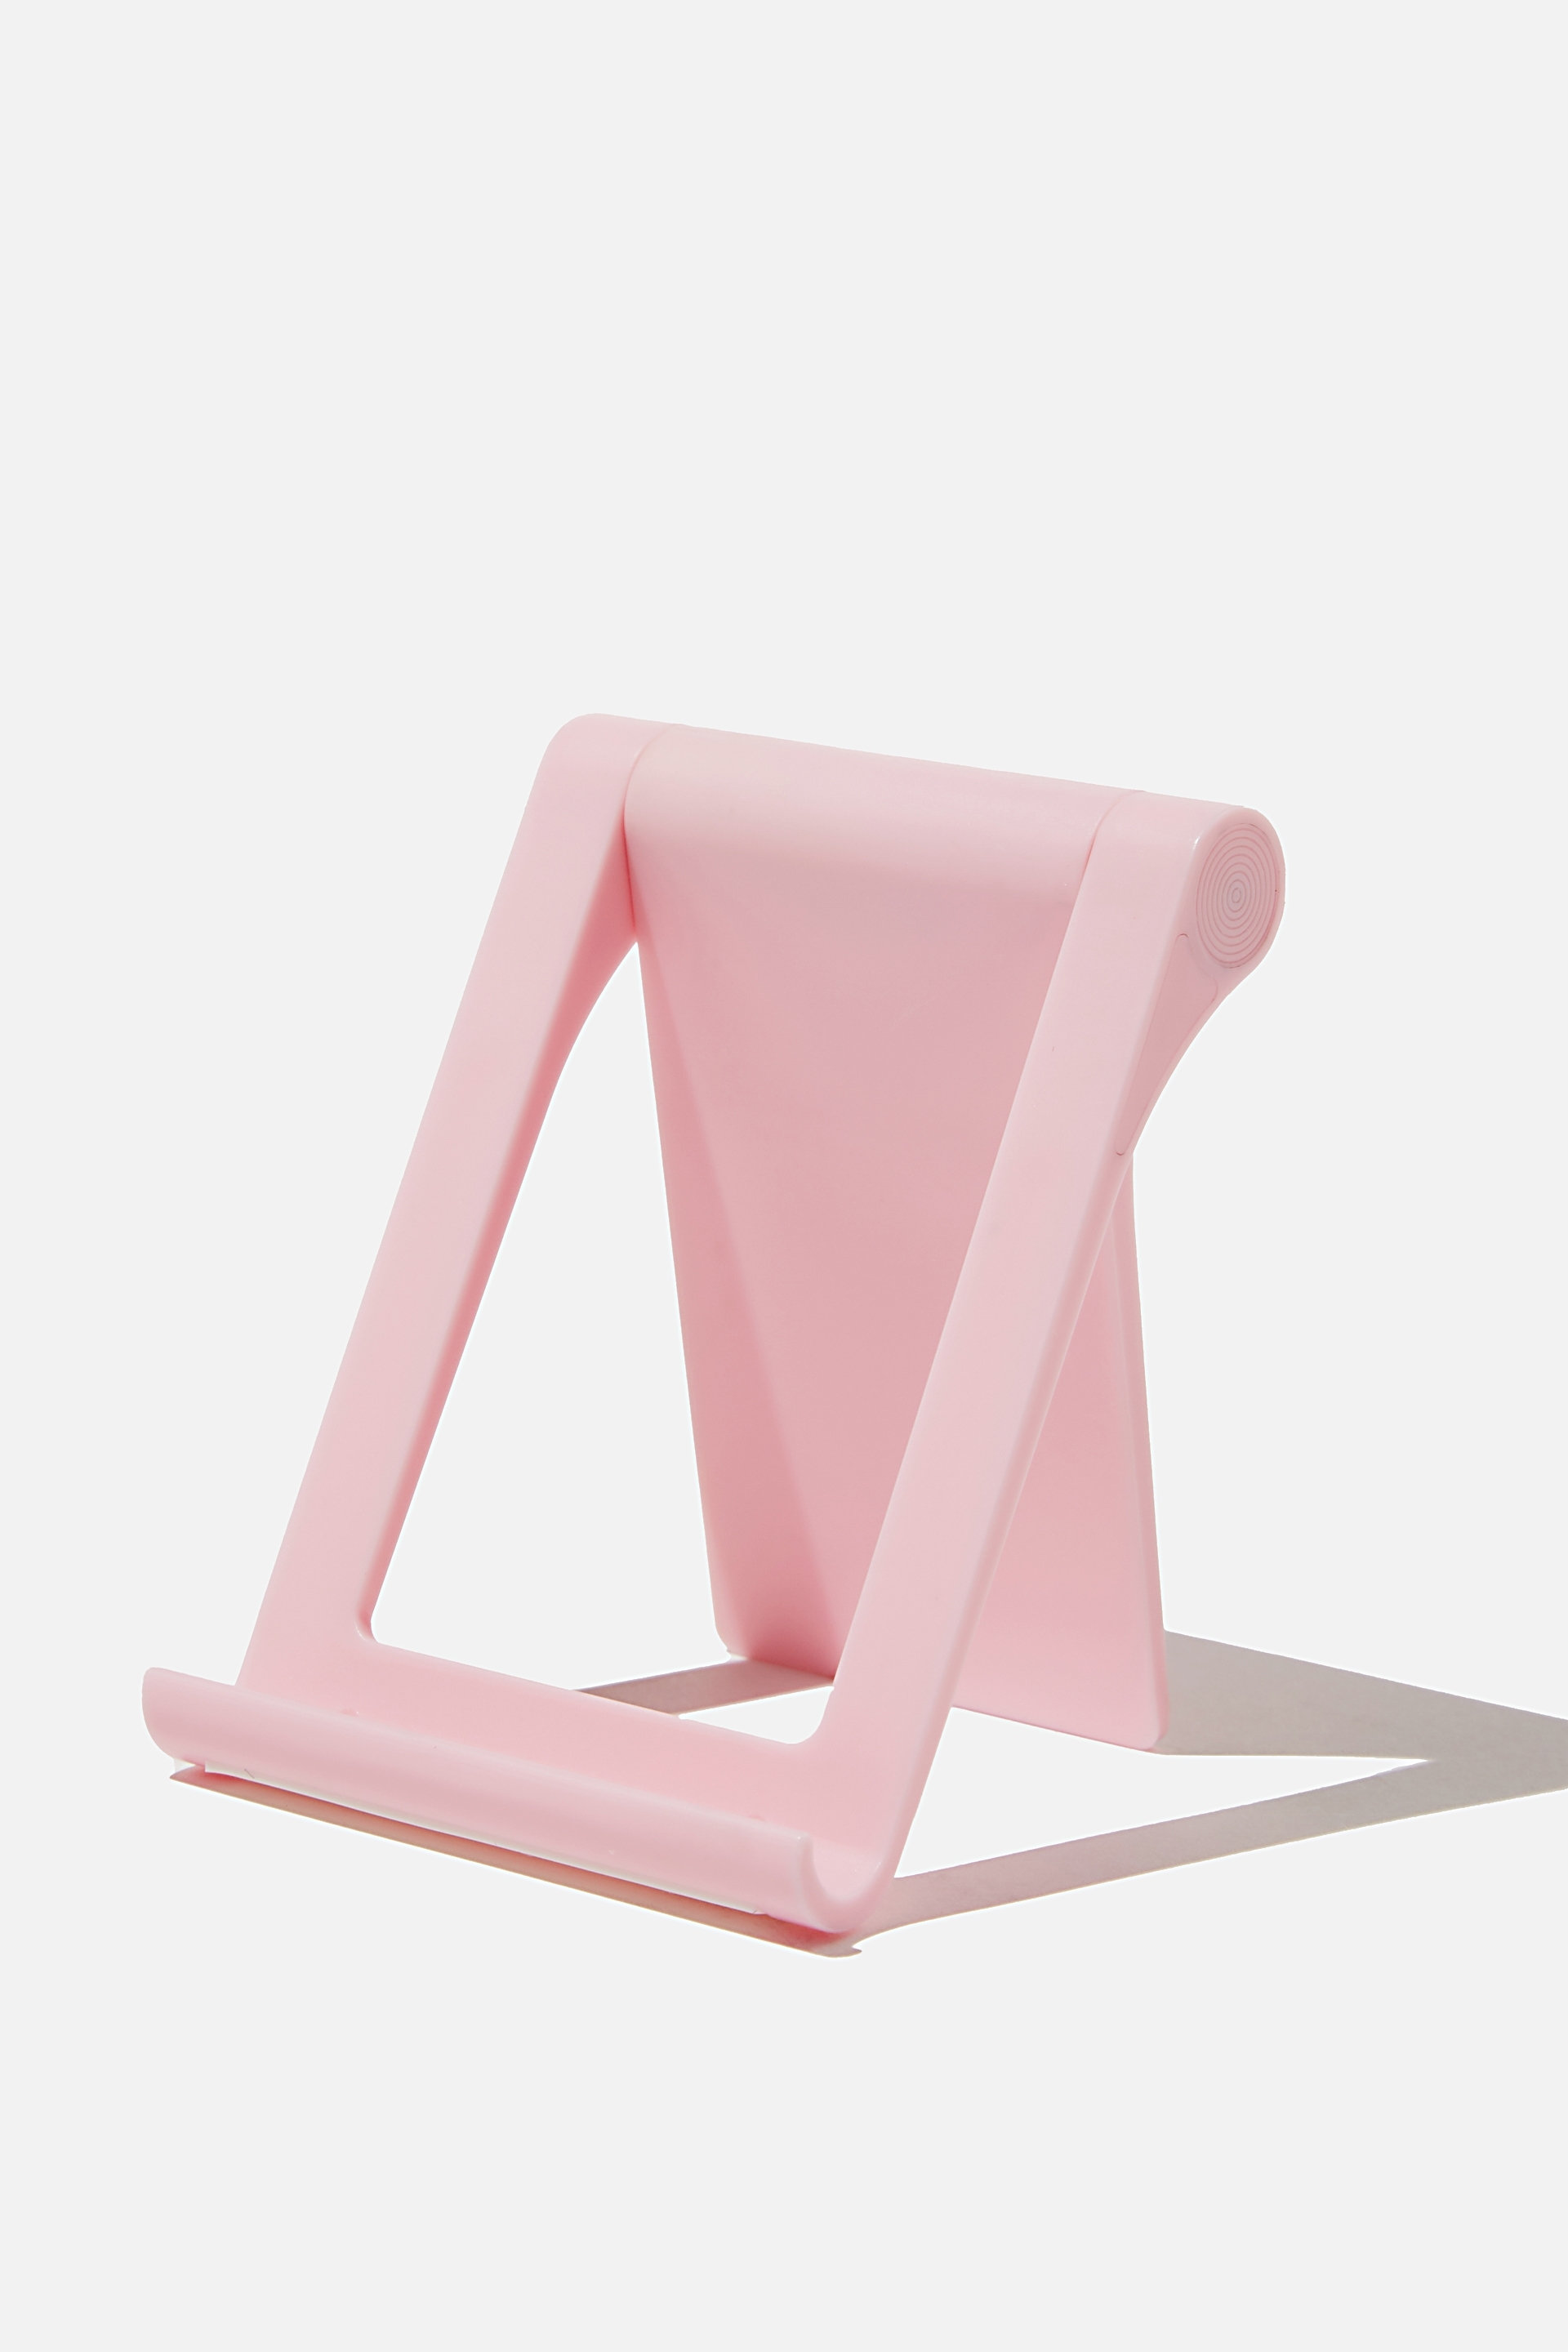 Typo - Collapsible Phone Stand - Plastic pink